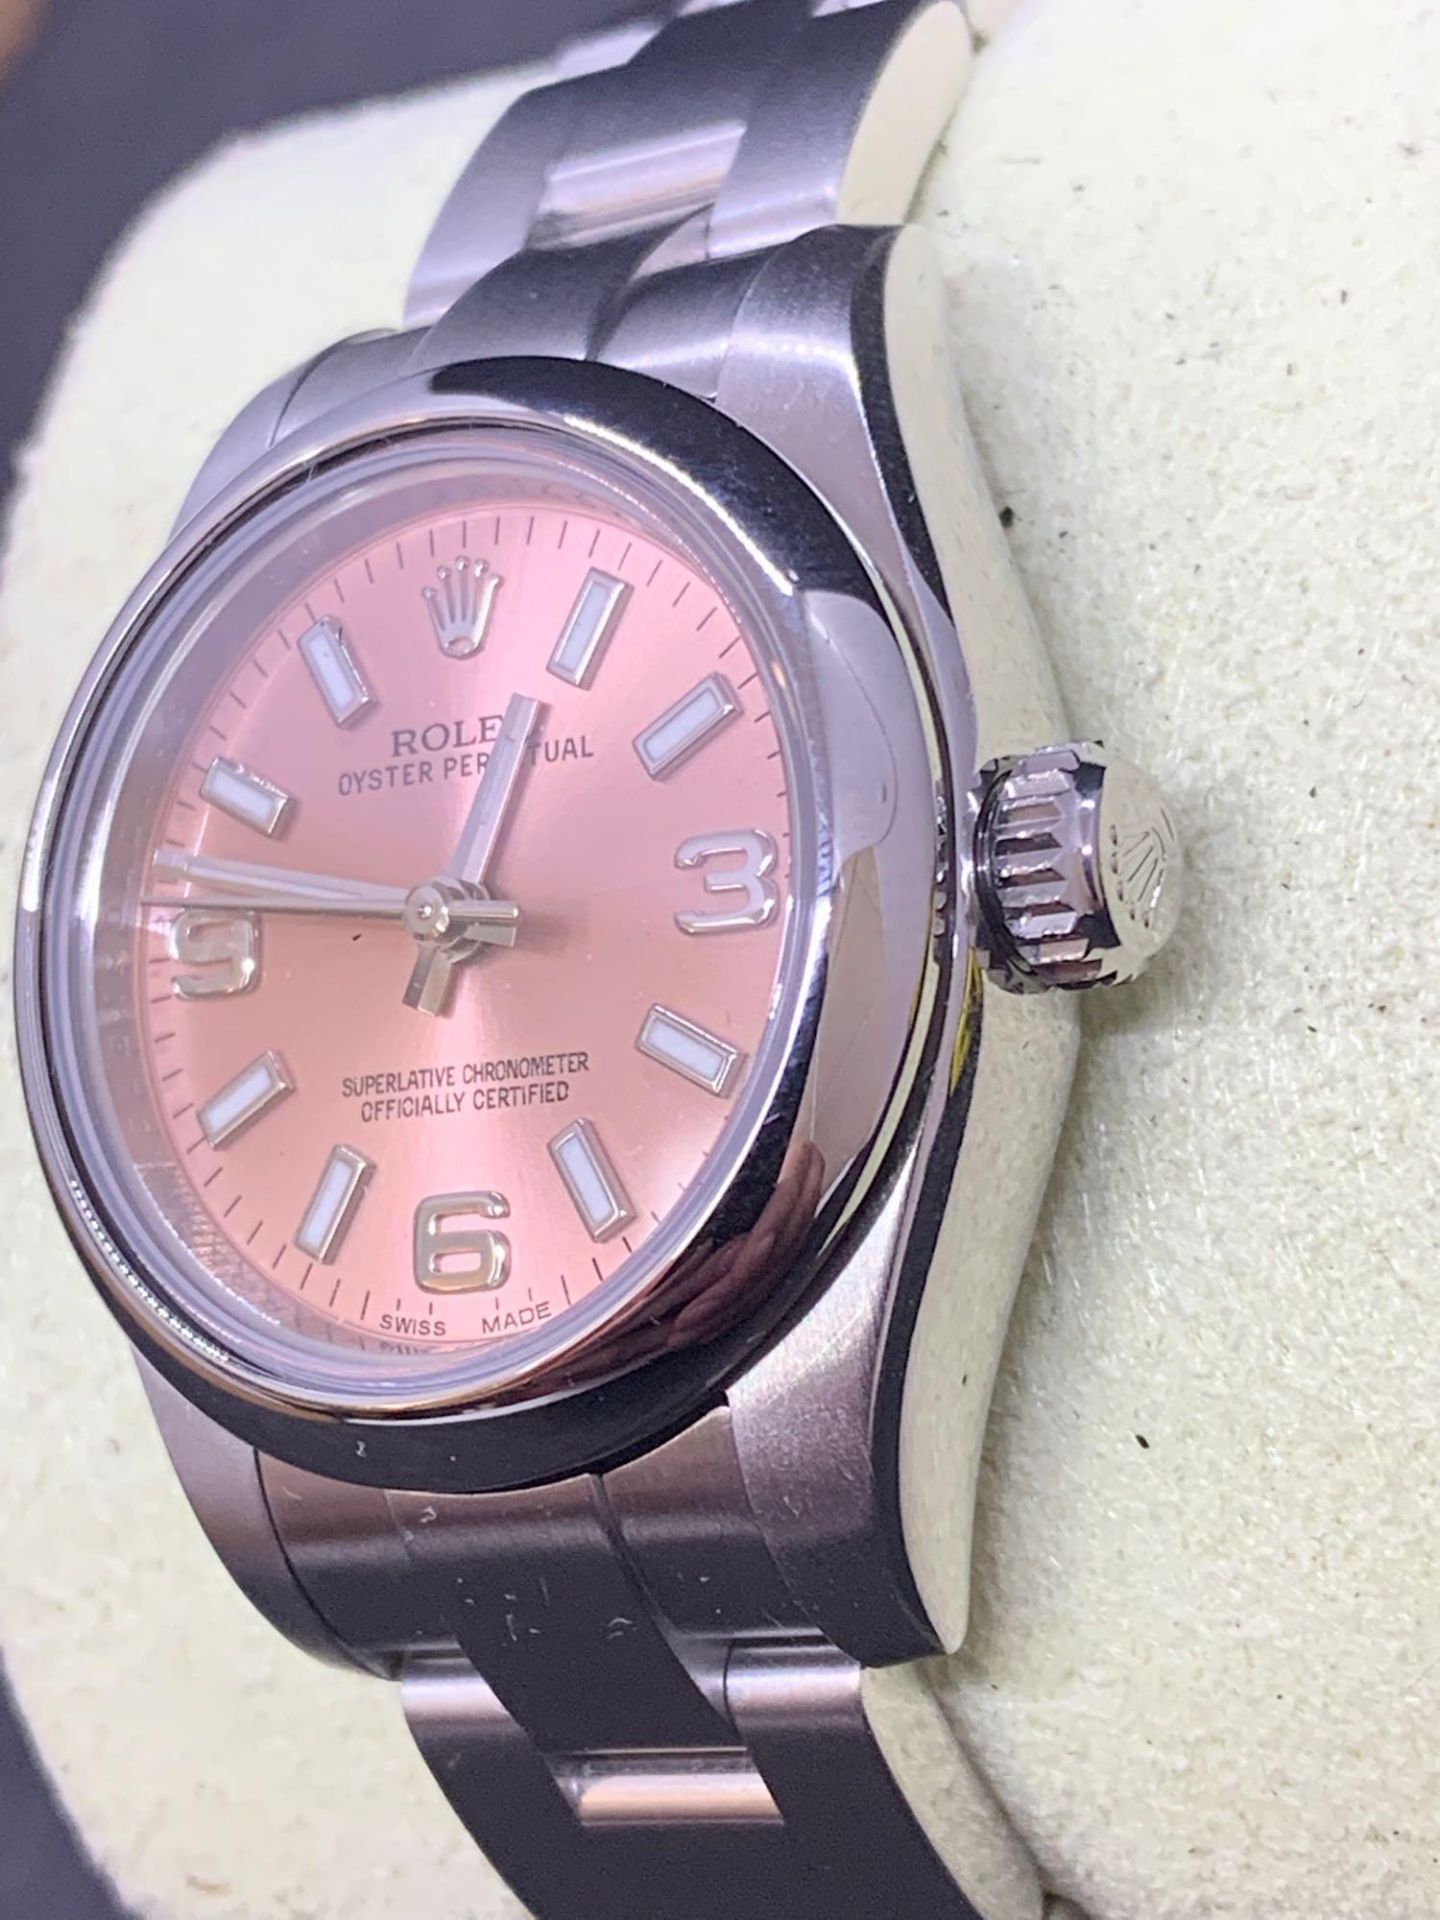 2016 Rolex Ladies 26 mim stainless steel salmon face watch - Image 3 of 7